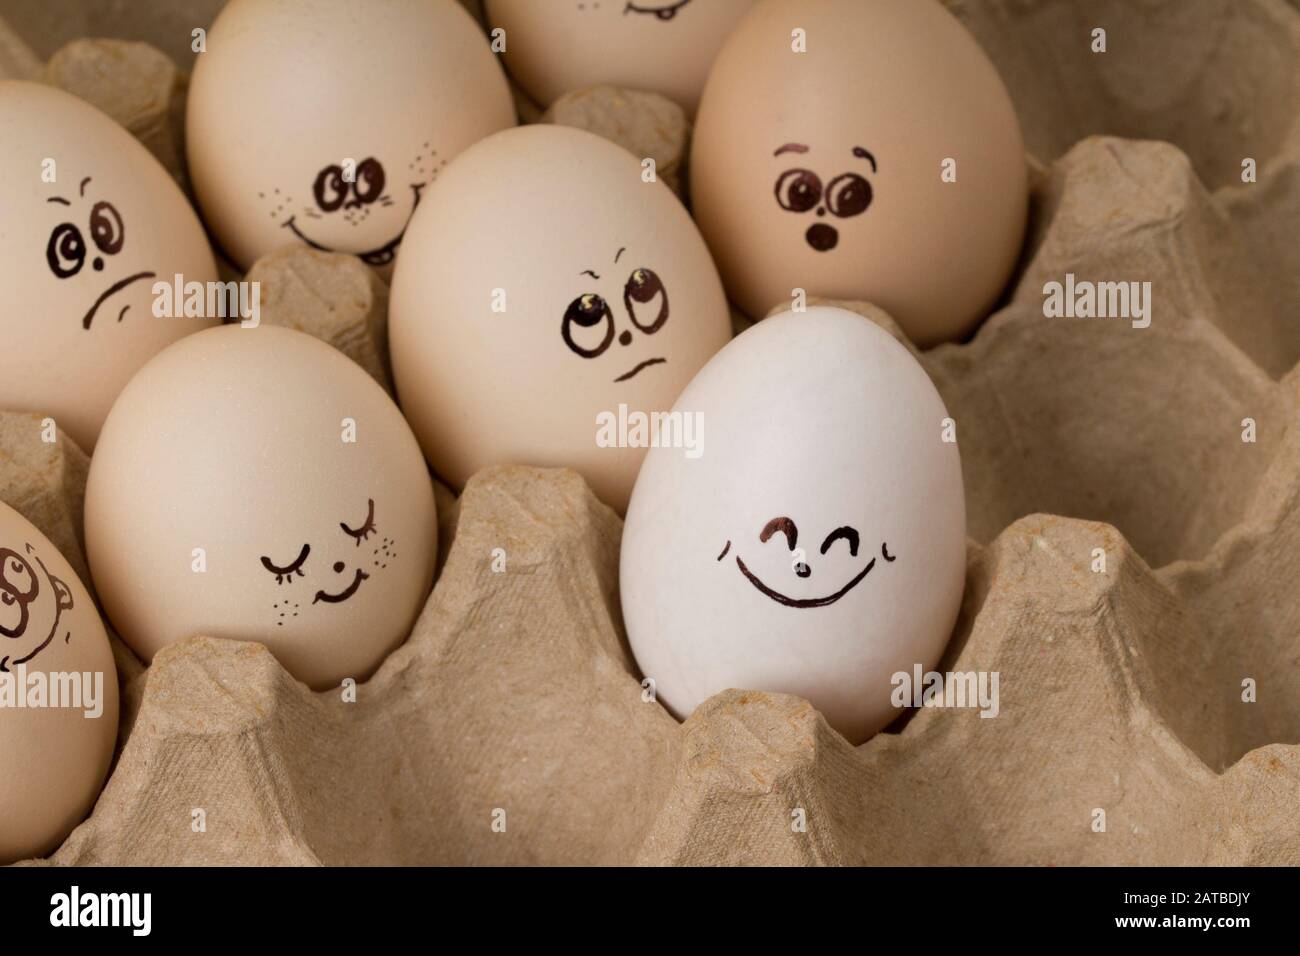 https://c8.alamy.com/comp/2ATBDJY/smiley-face-on-eggs-in-egg-boxhappy-easter-concept-2ATBDJY.jpg